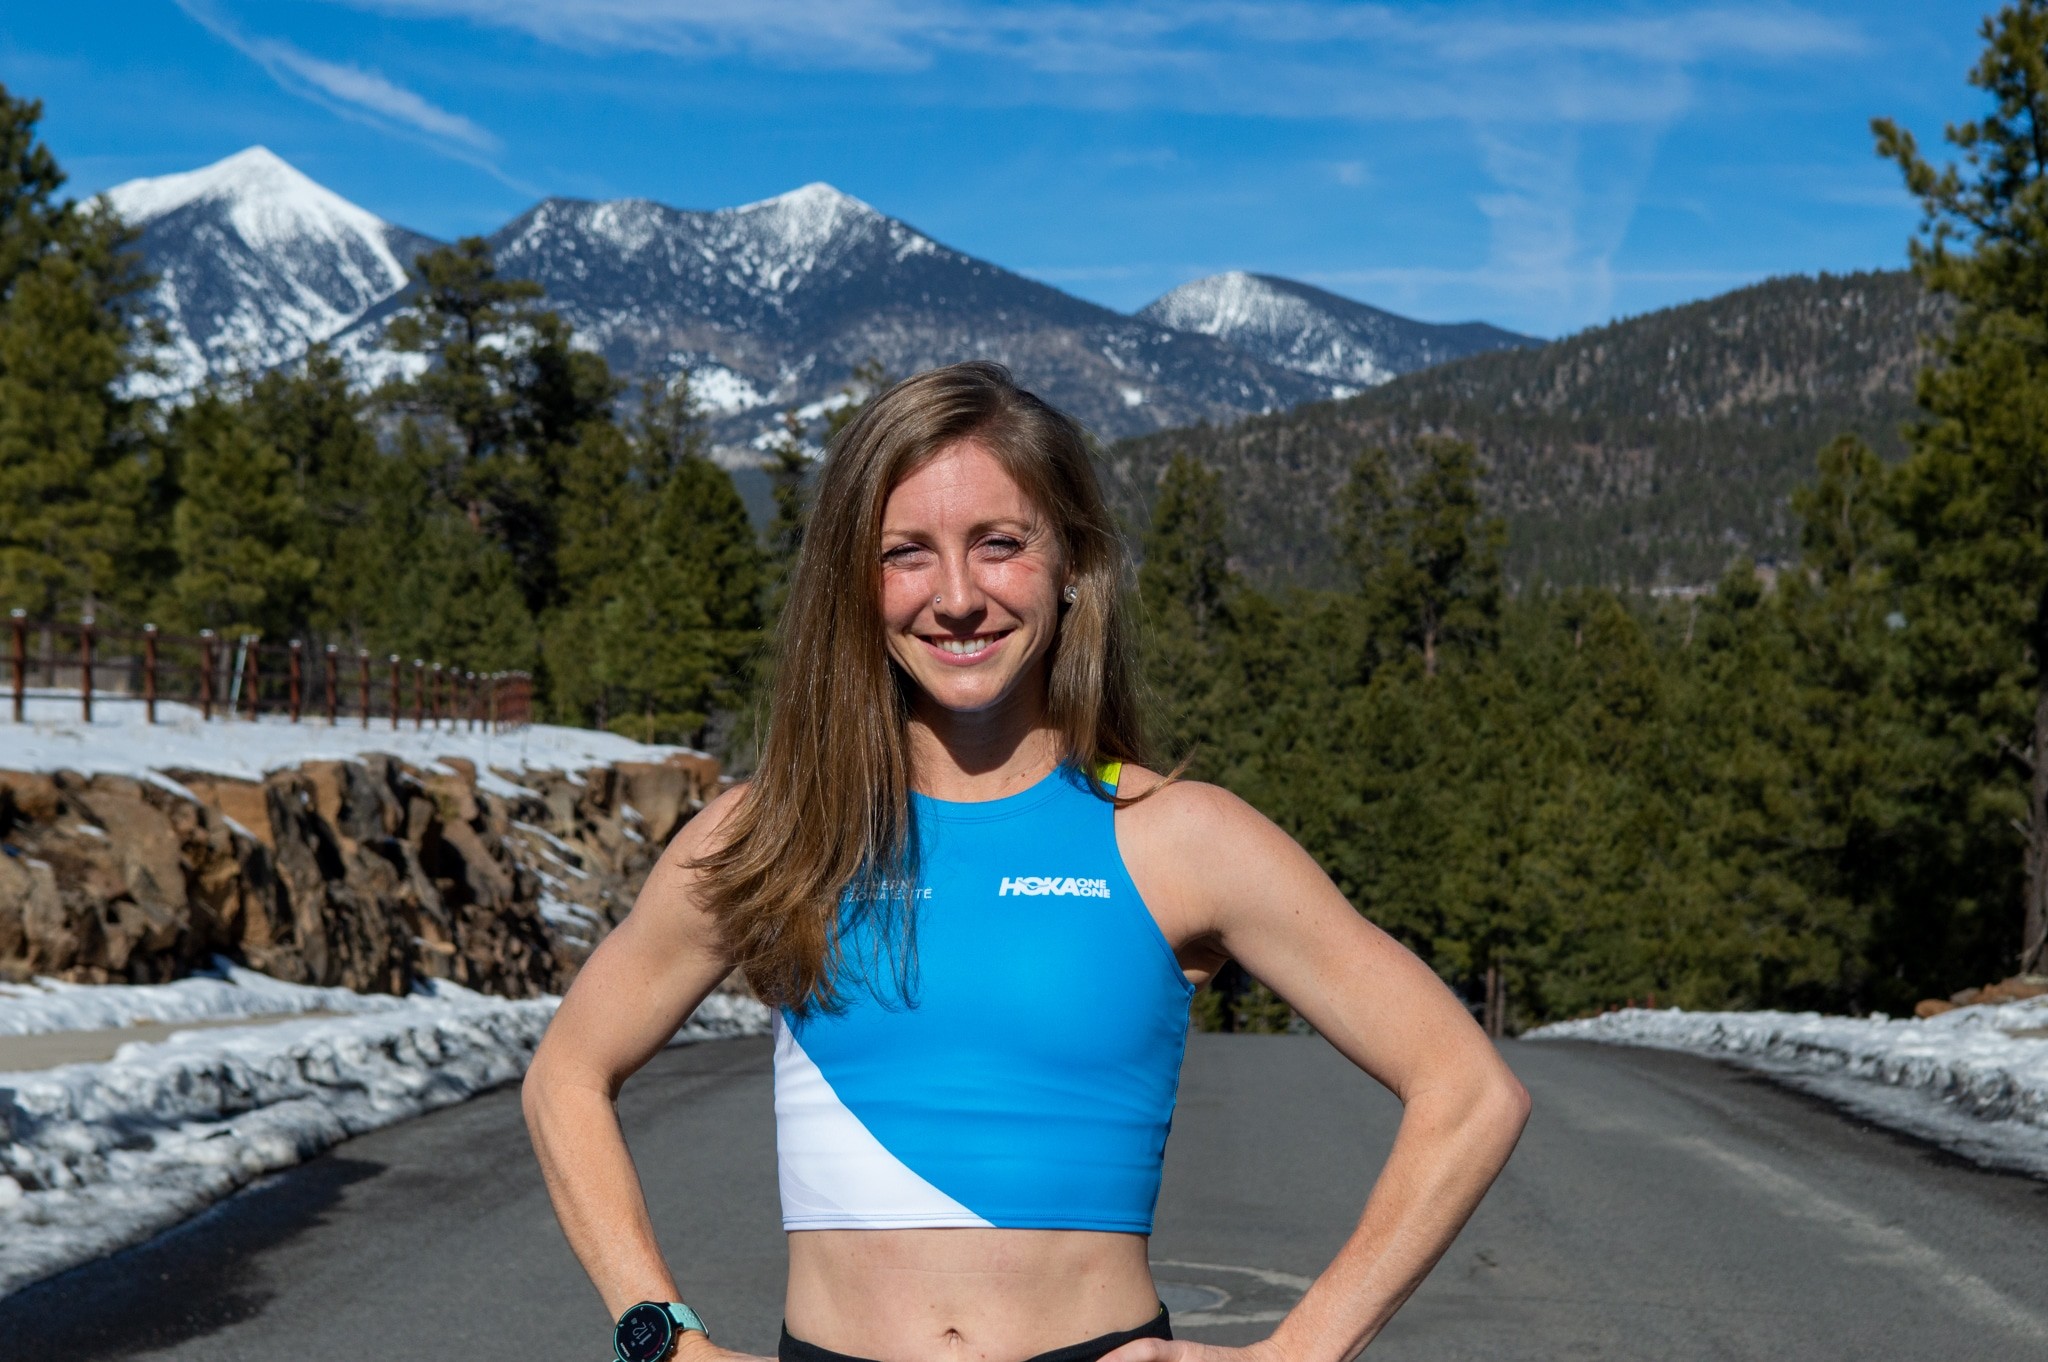 HOKA ONE ONE Northern Arizona Elite has announced that Lauren Paquette has joined their team 